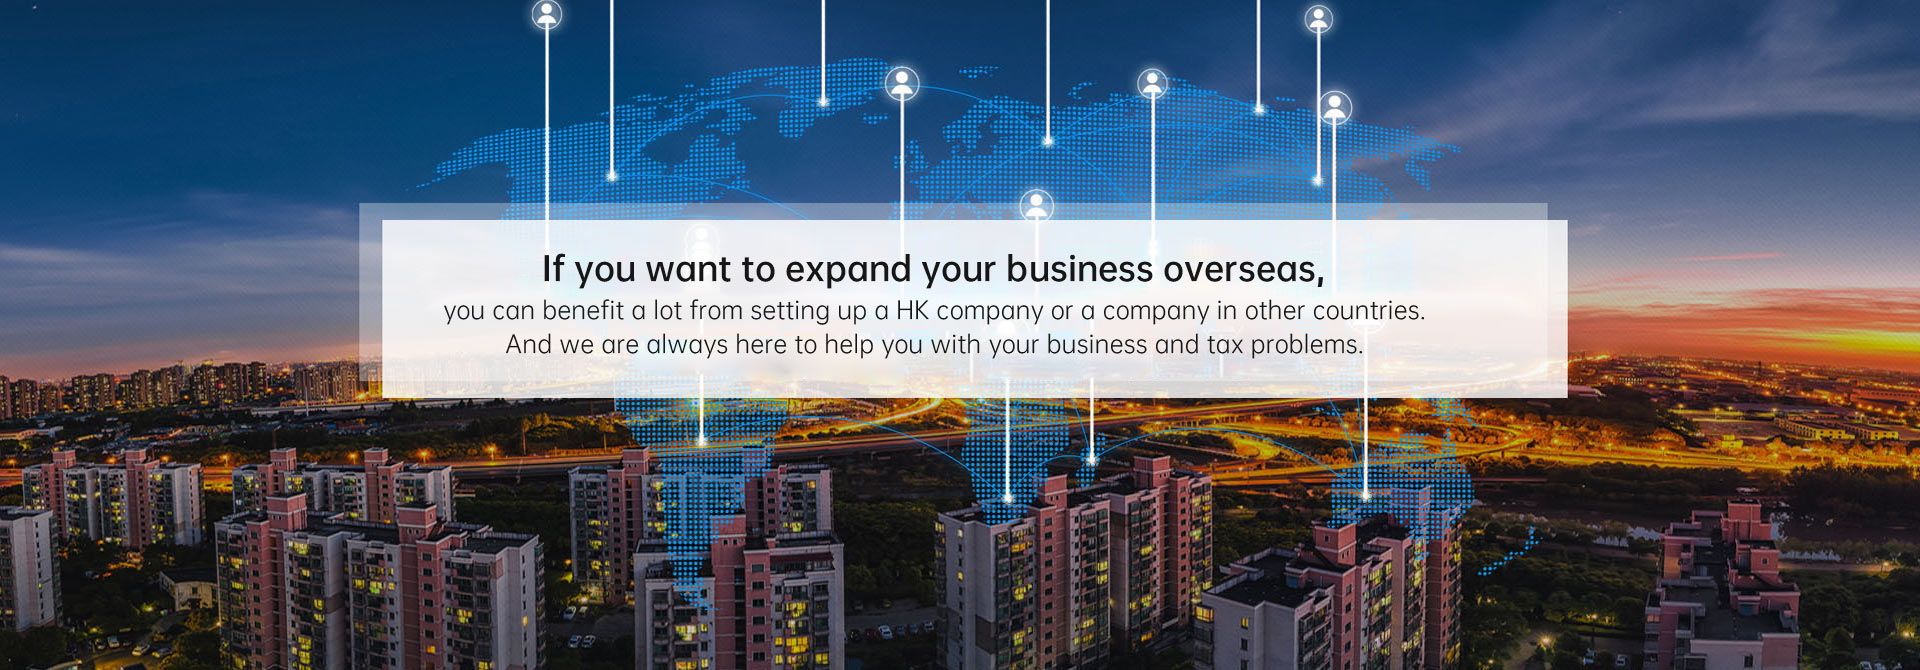 if you want to expand your business overseas